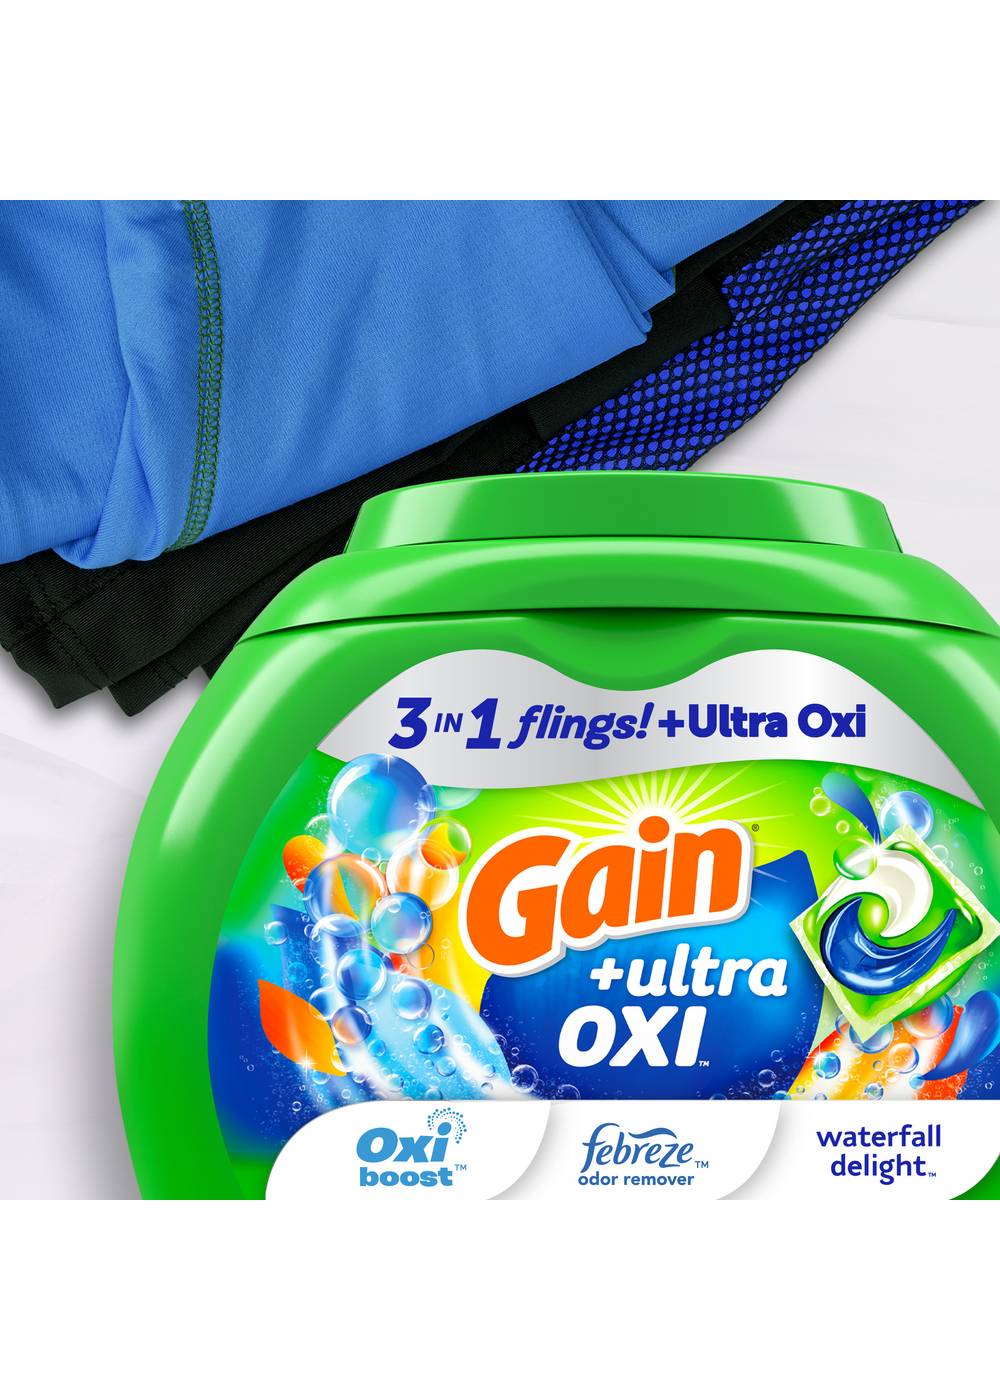 Gain Flings! Oxi Boost Waterfall Delight HE Laundry Detergent Pacs; image 11 of 11